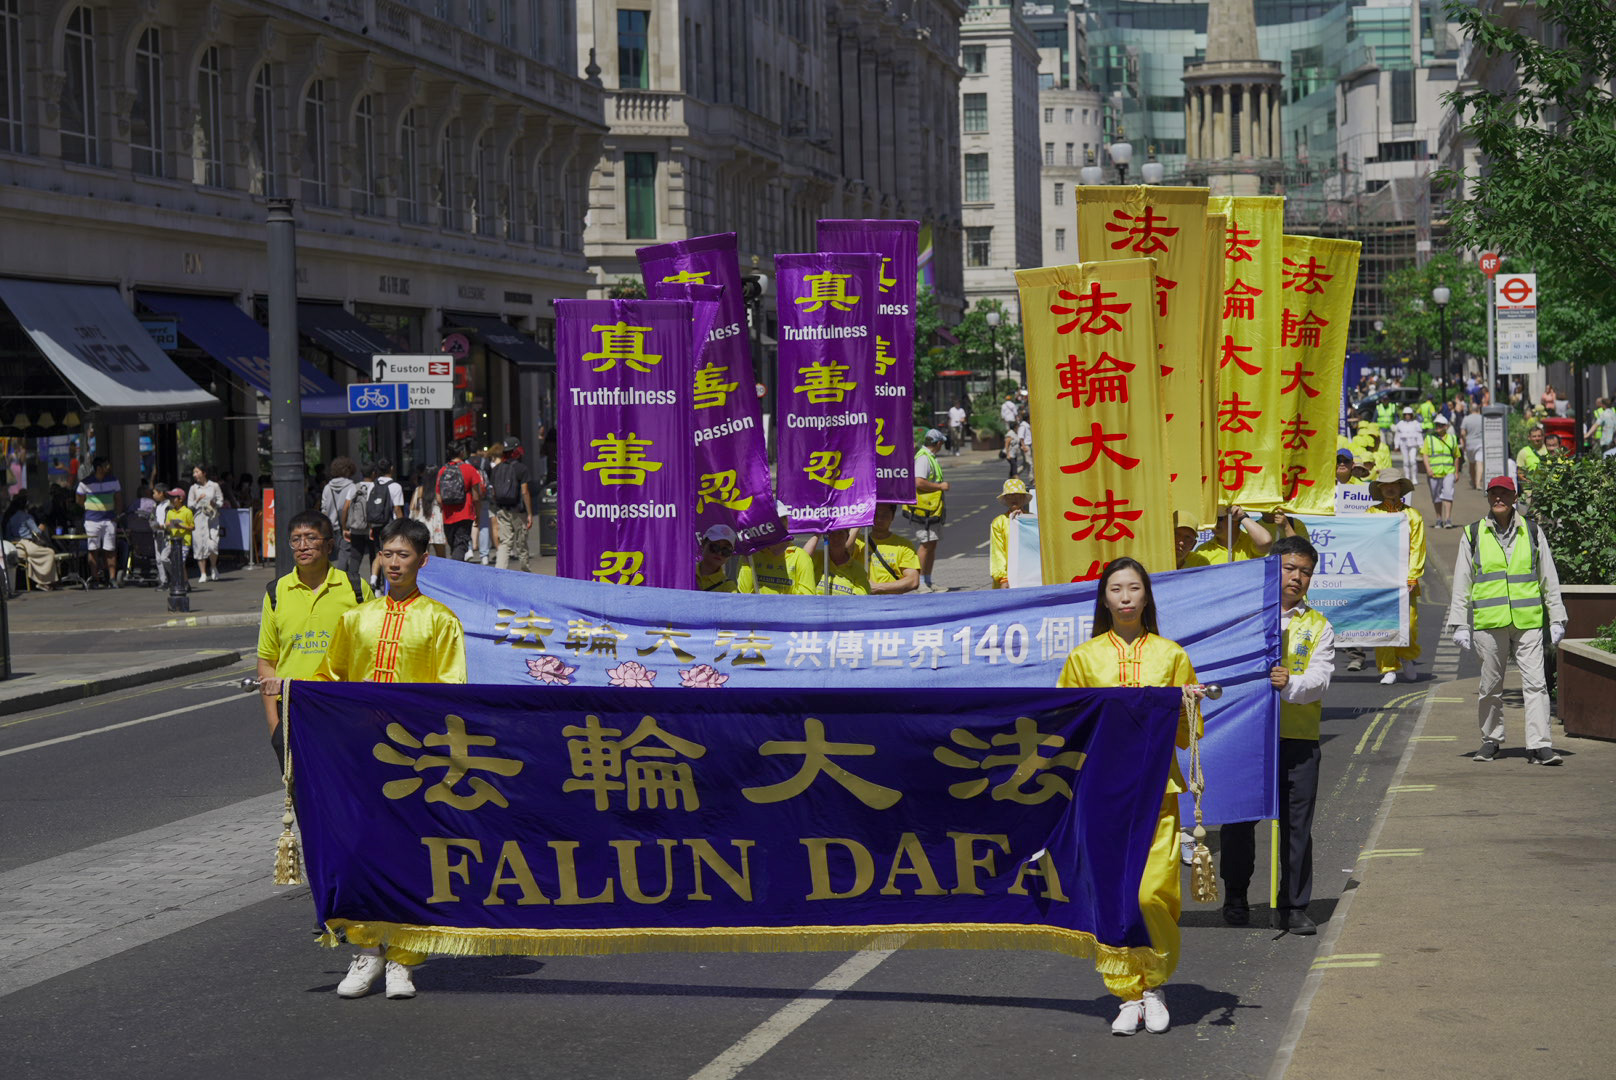 London Event Marks 23 Years of Chinese Oppression Against Spiritual Discipline Falun Gong